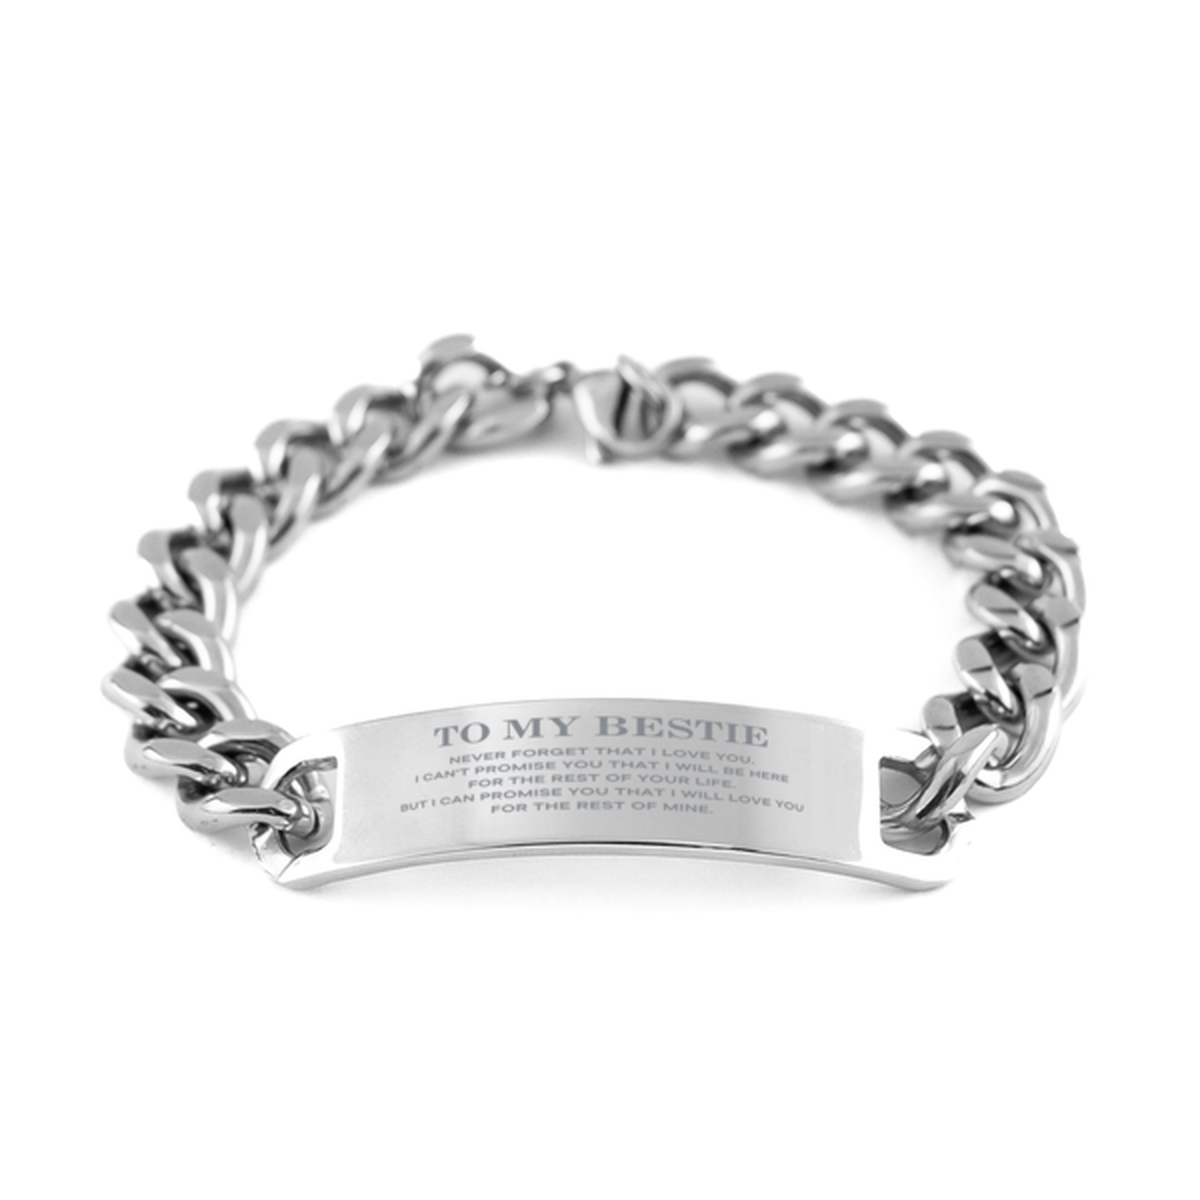 To My Bestie Gifts, I will love you for the rest of mine, Love Bestie Bracelet, Birthday Christmas Unique Cuban Chain Stainless Steel Bracelet For Bestie